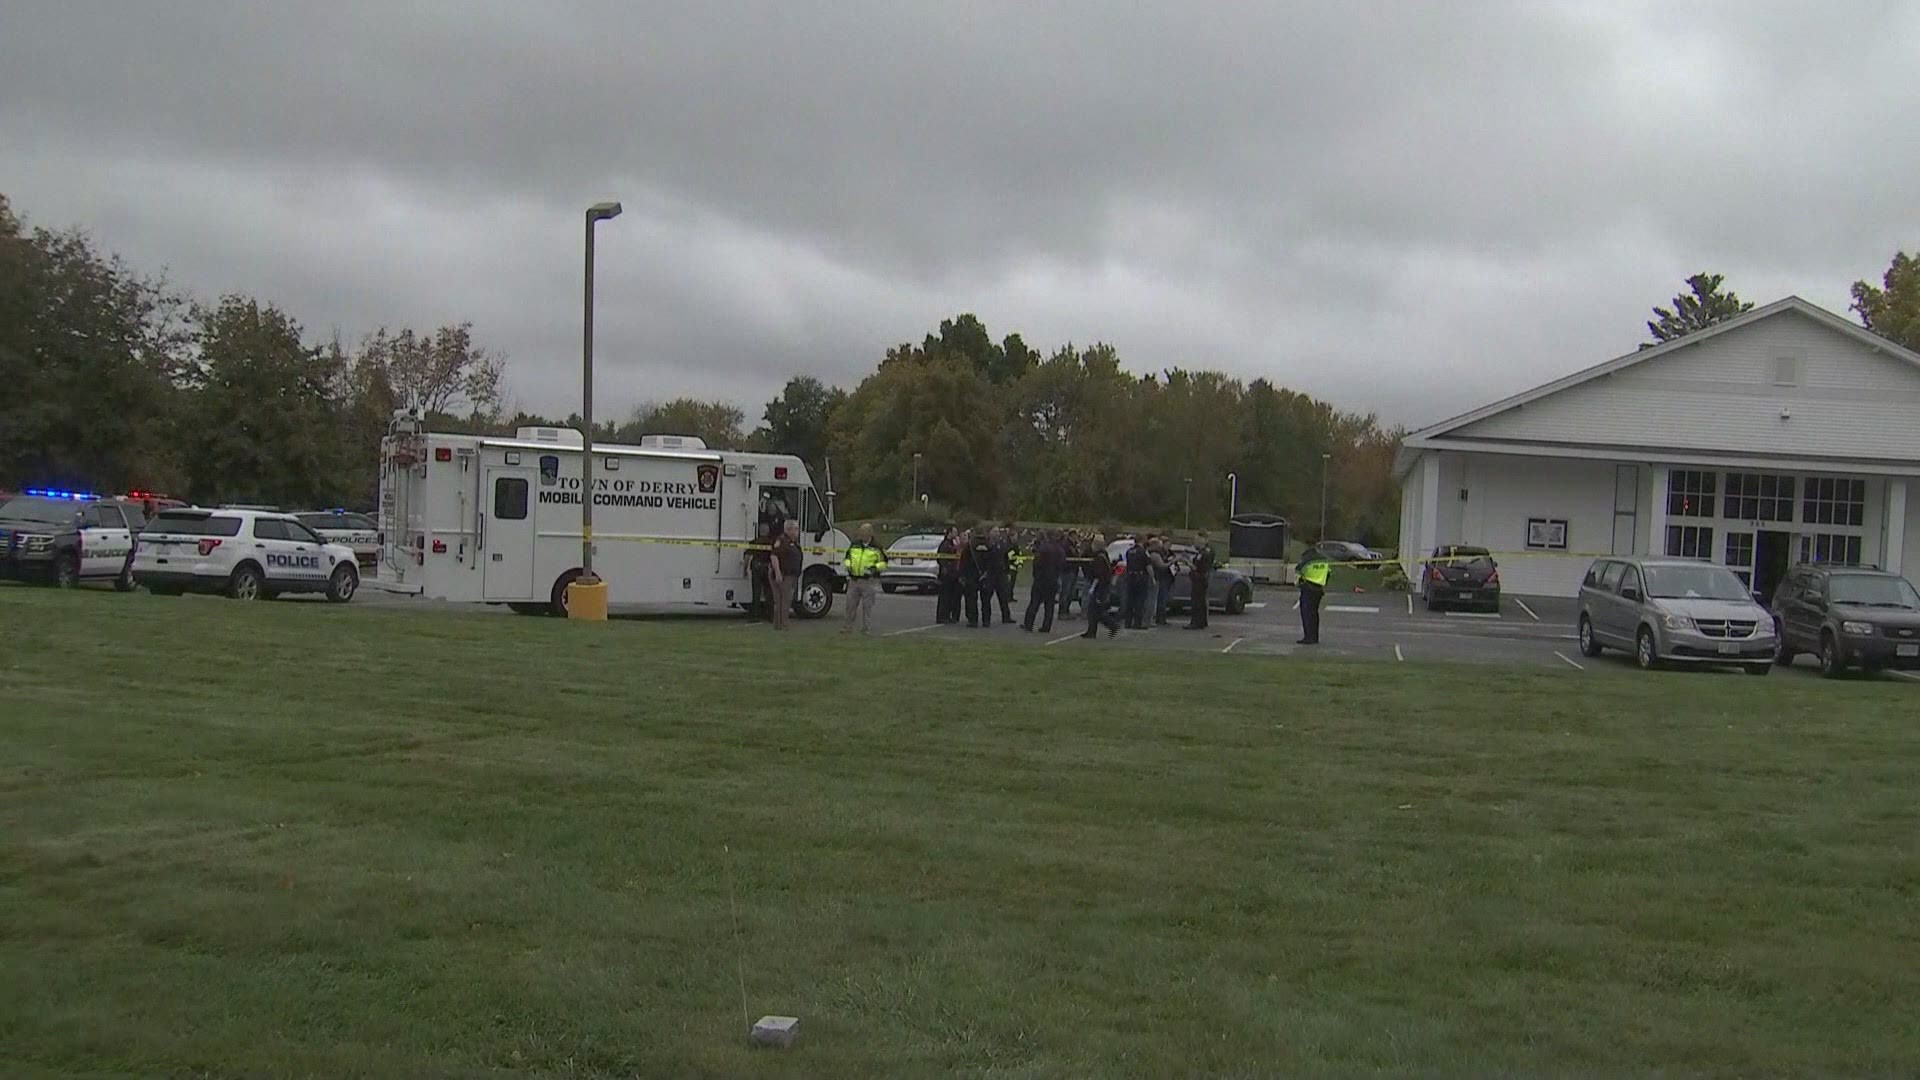 At least one person injured in a Pelham, New Hampshire church shooting.